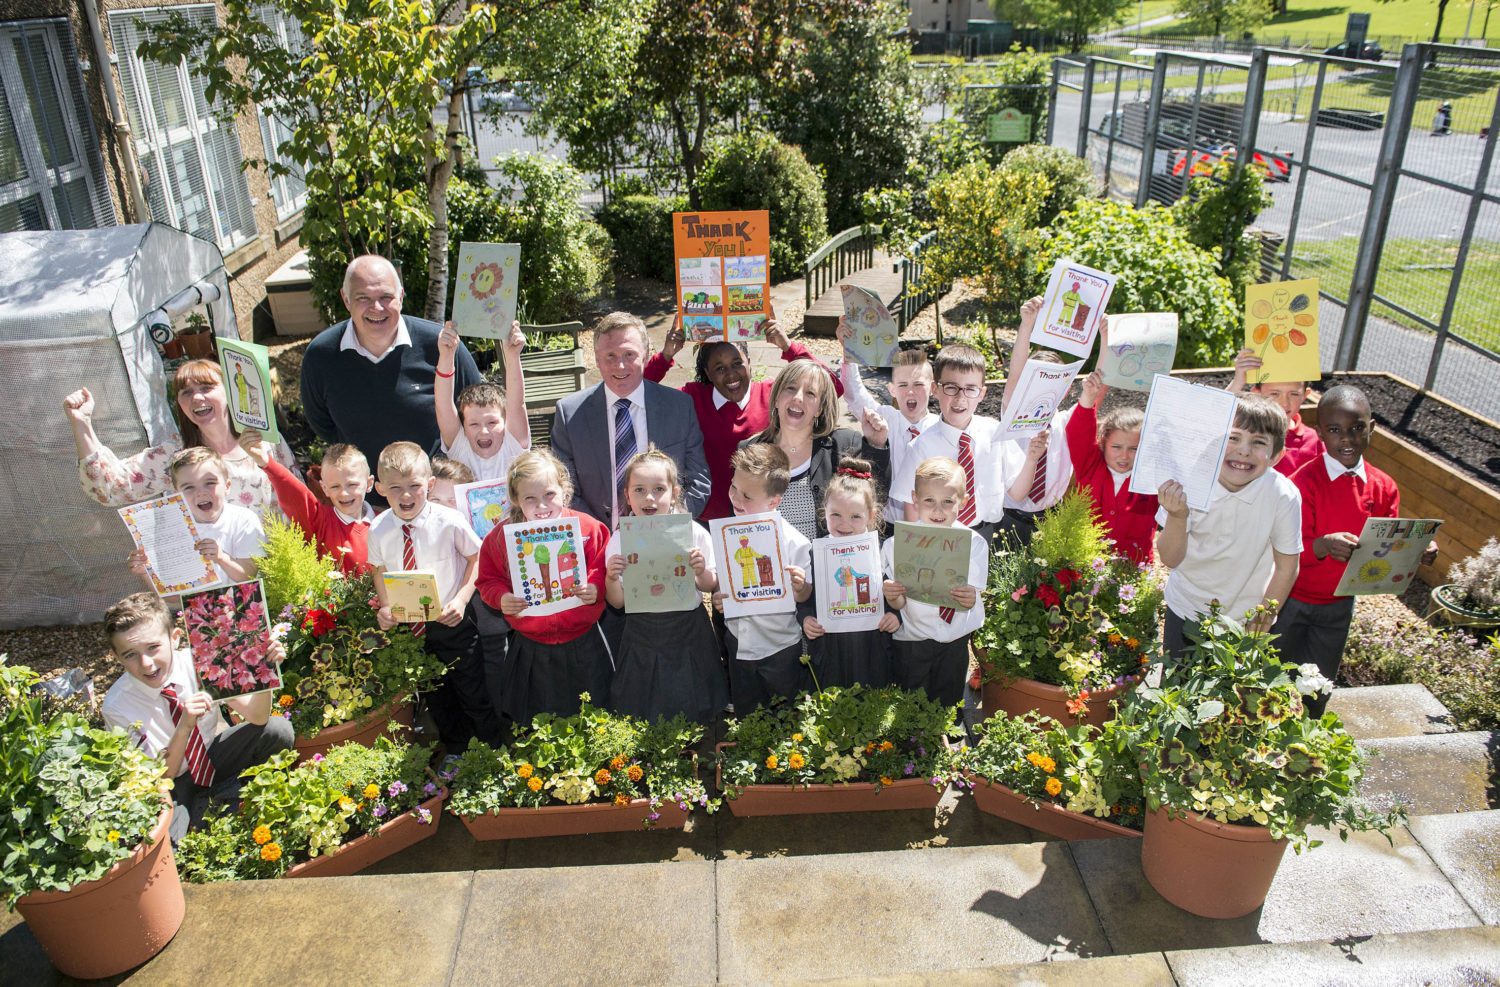 Captions Garden 1 pic: General manager at intu Braehead, Gary Turnbull with Caragh Moohan, aged five and six-year-old Kodey McDonald. Garden 2 pic: Pupils Caragh Moohan, aged five; Lucy McLay, aged nine and six-year-old Kodey McDonald enjoy their refurbished garden after it was vandalised. Thanks pic: Pupils at St Paul’s Primary made ‘thank you’ cards for intu Braehead general manager, Gary Turnbull, second from left in back row and Drew Gallagher, a director with Cardwell Nurseries, left.